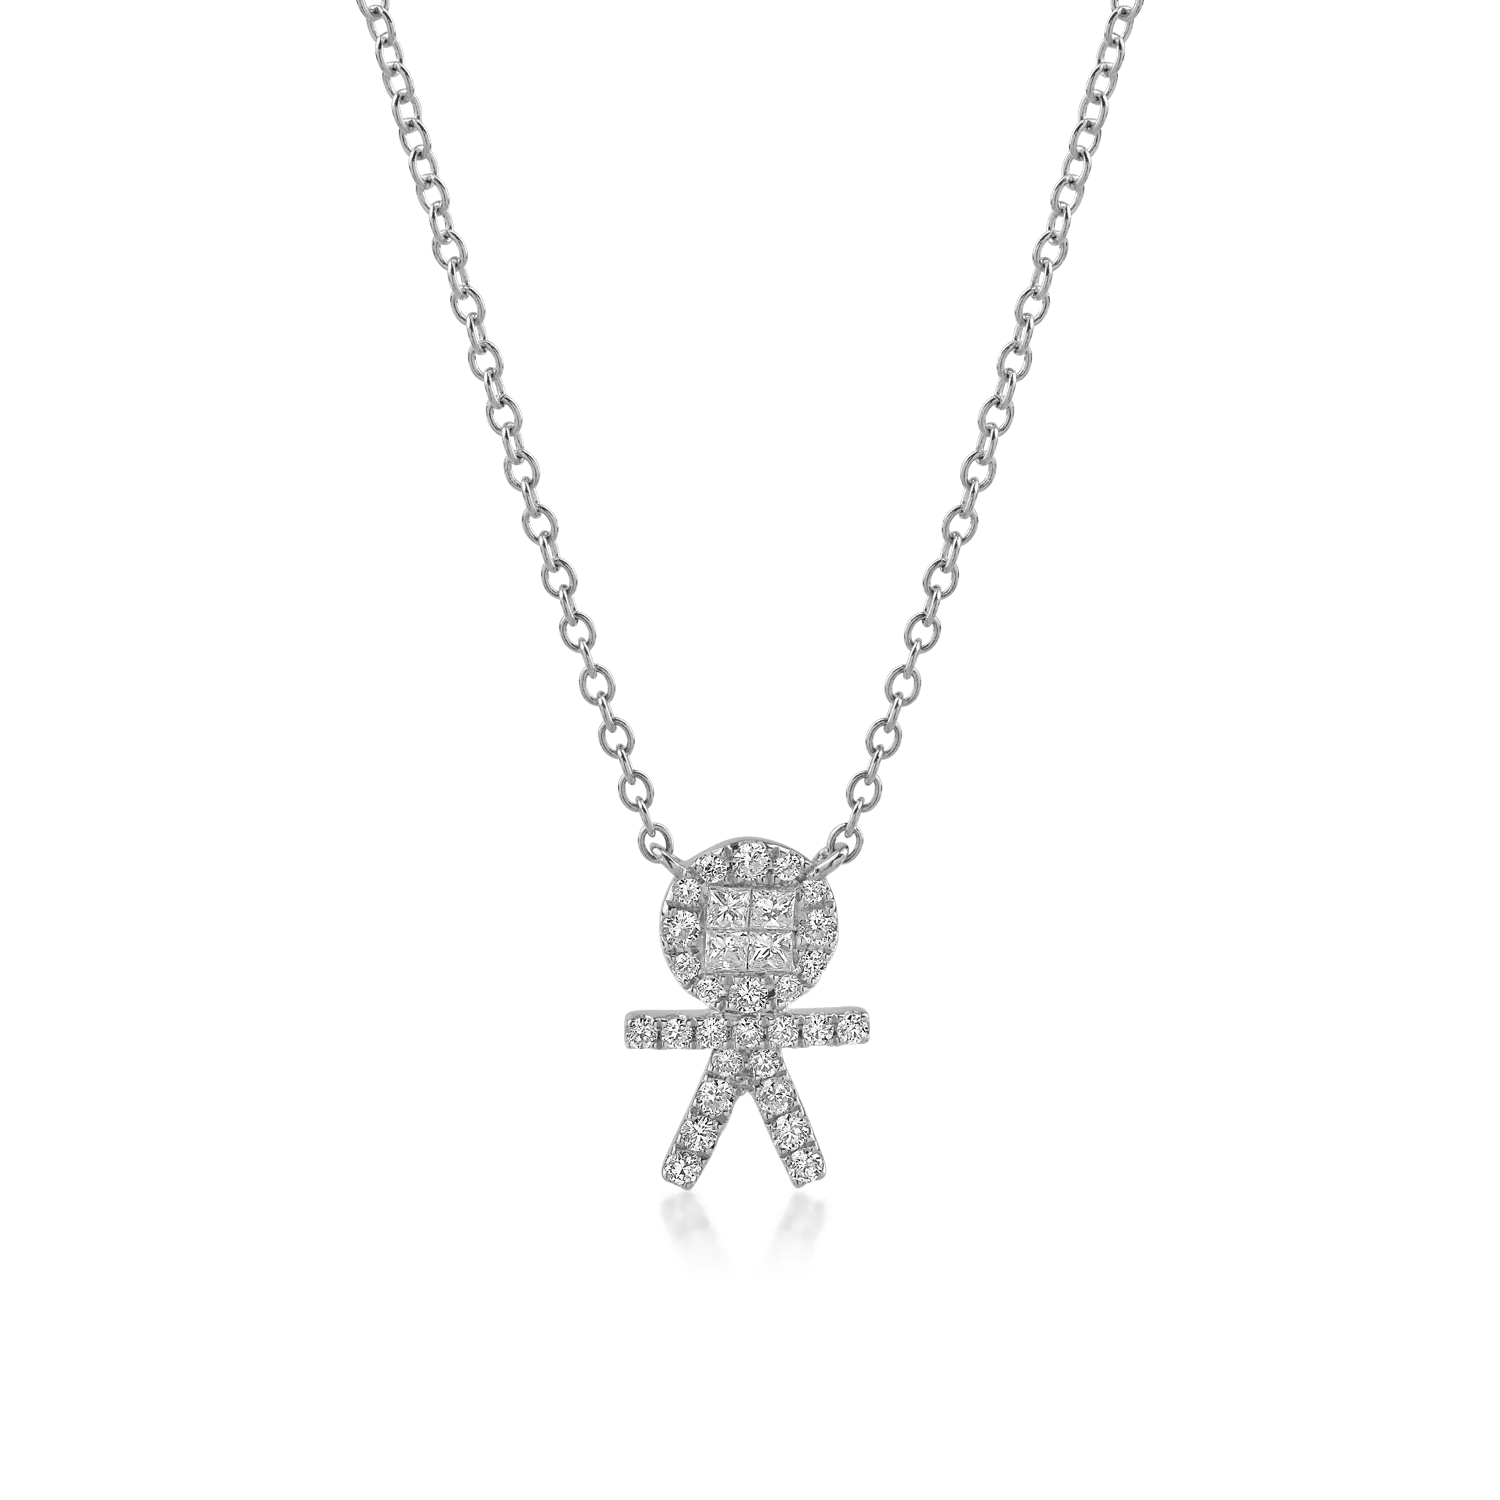 White gold chain with pendant with 0.32ct diamonds